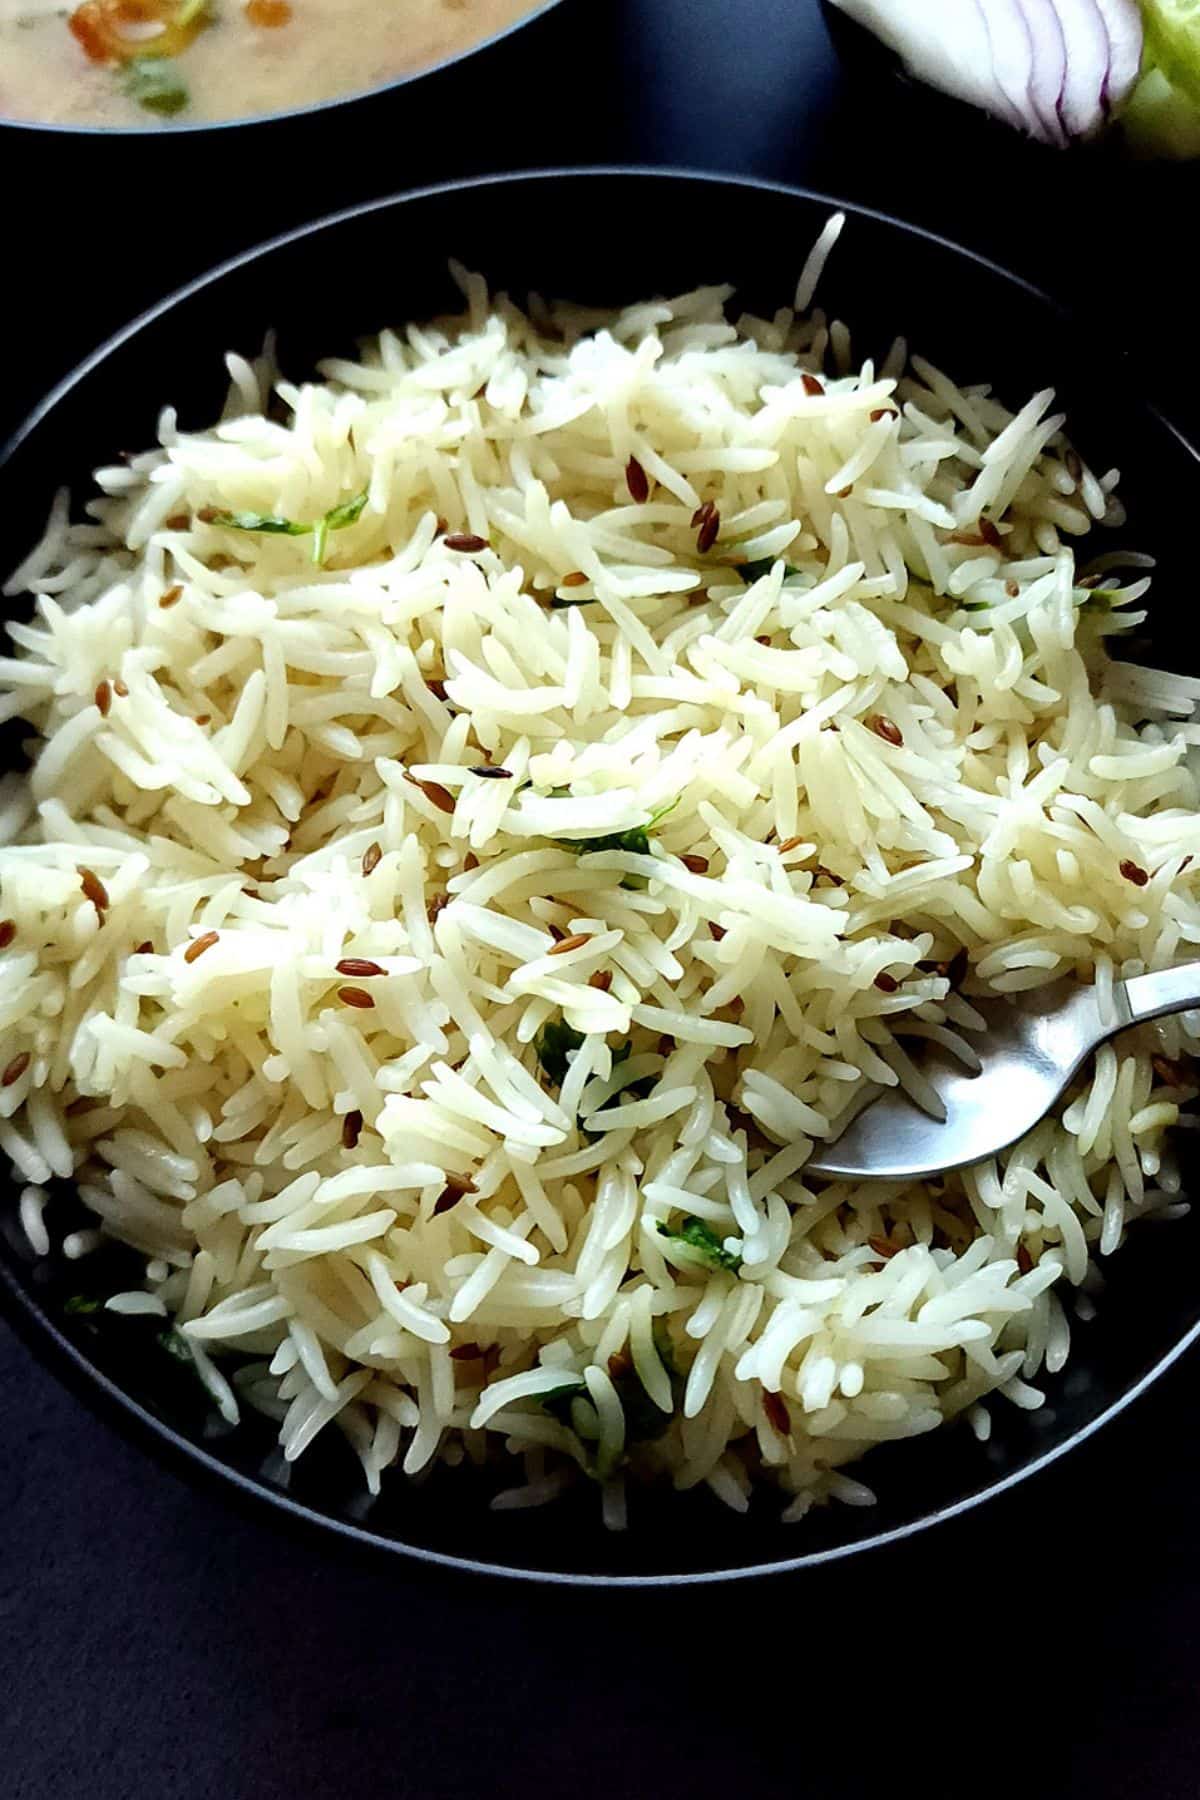 Jeera rice served in a black bowl with a spoon.